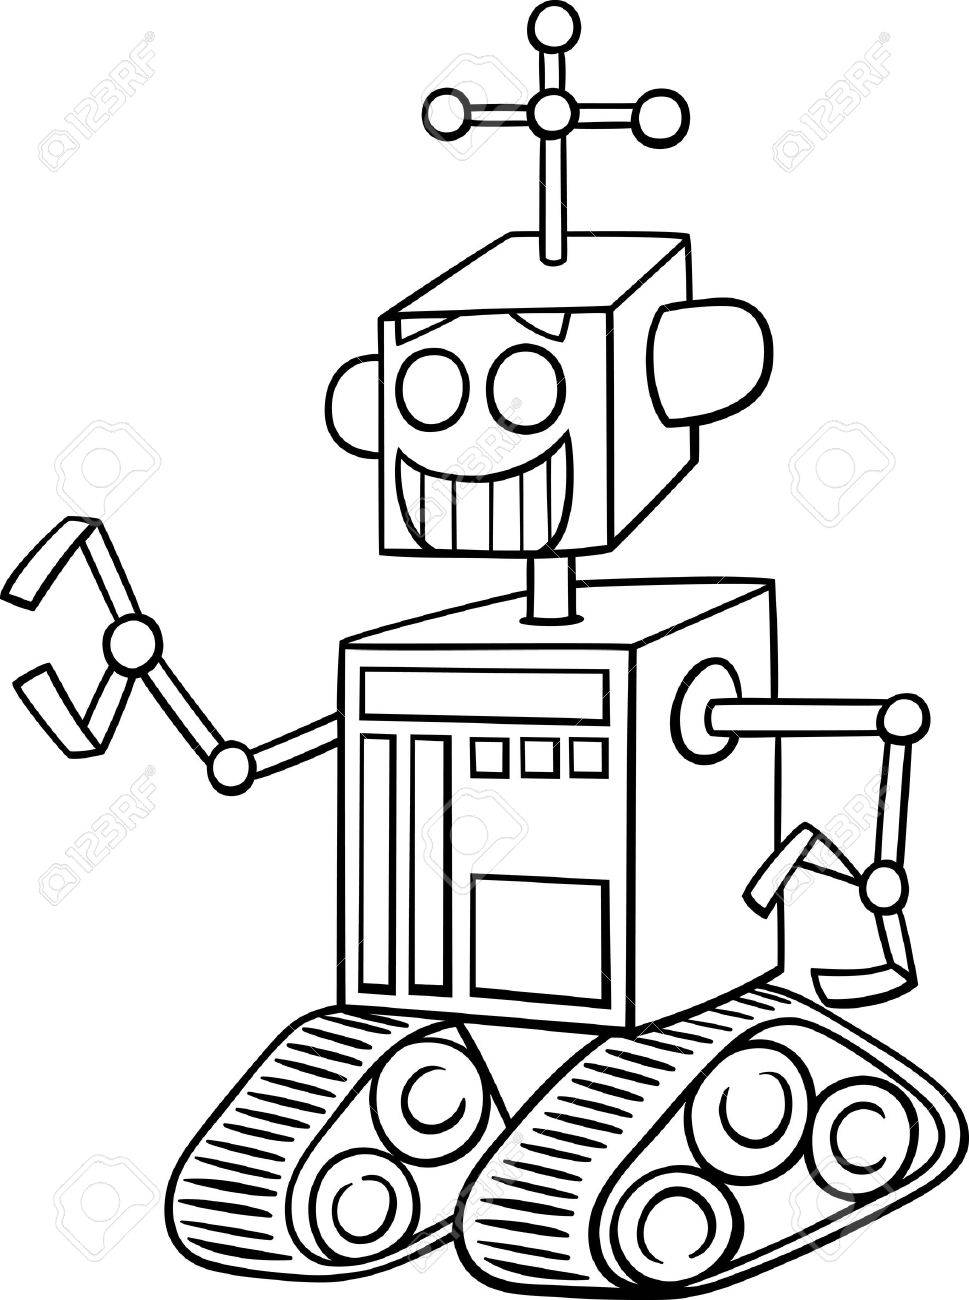 Robot black and white clipart 4 » Clipart Station.